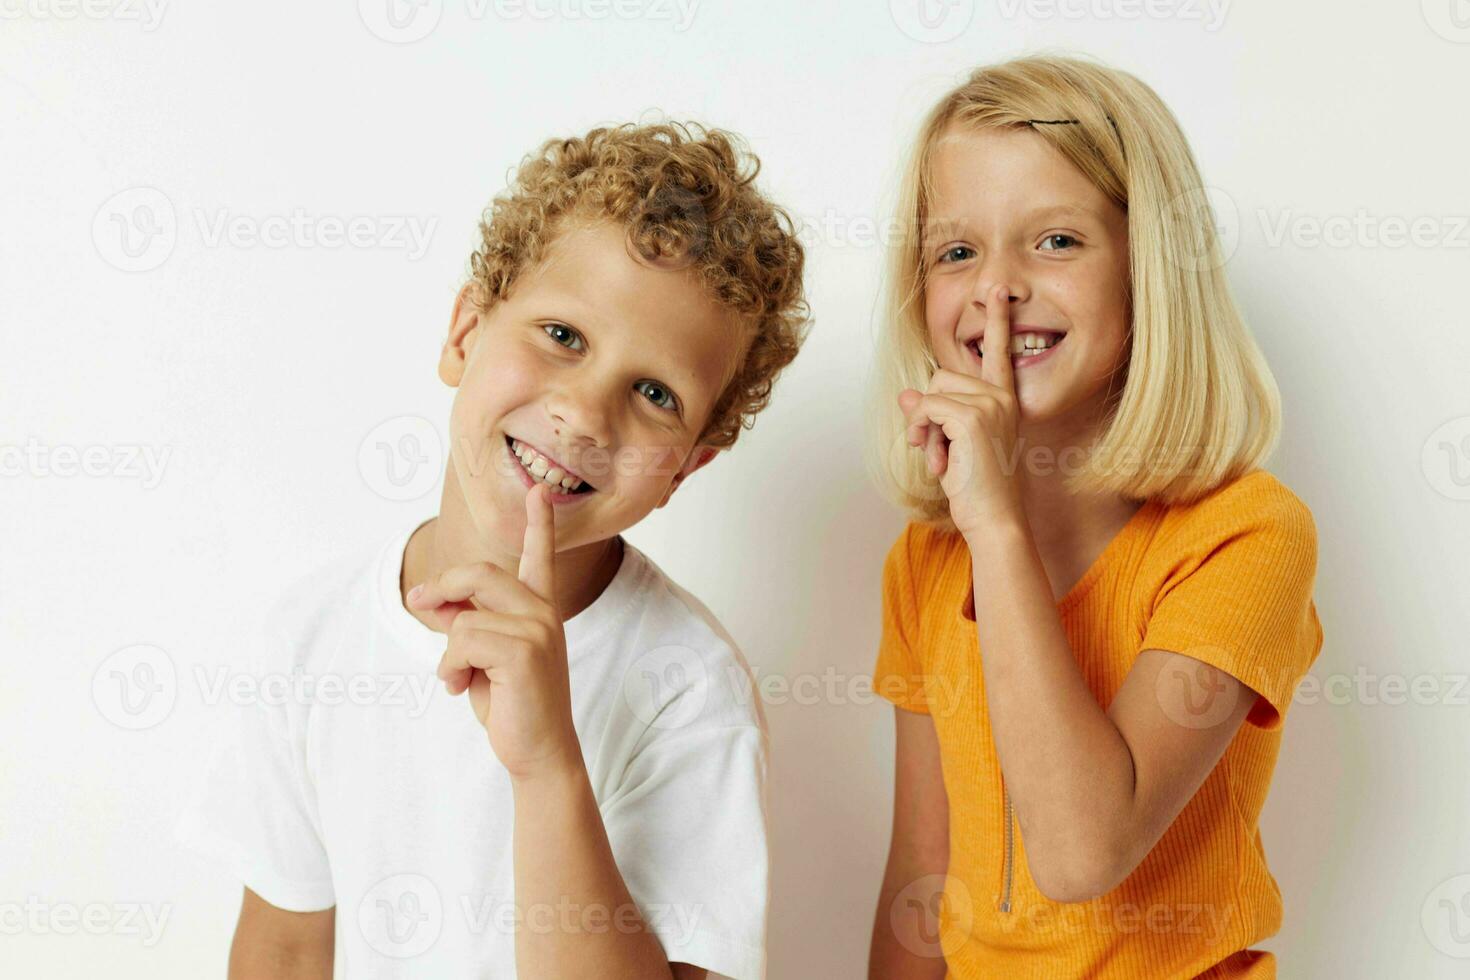 Boy and girl hand gestures fun childhood isolated background unaltered photo